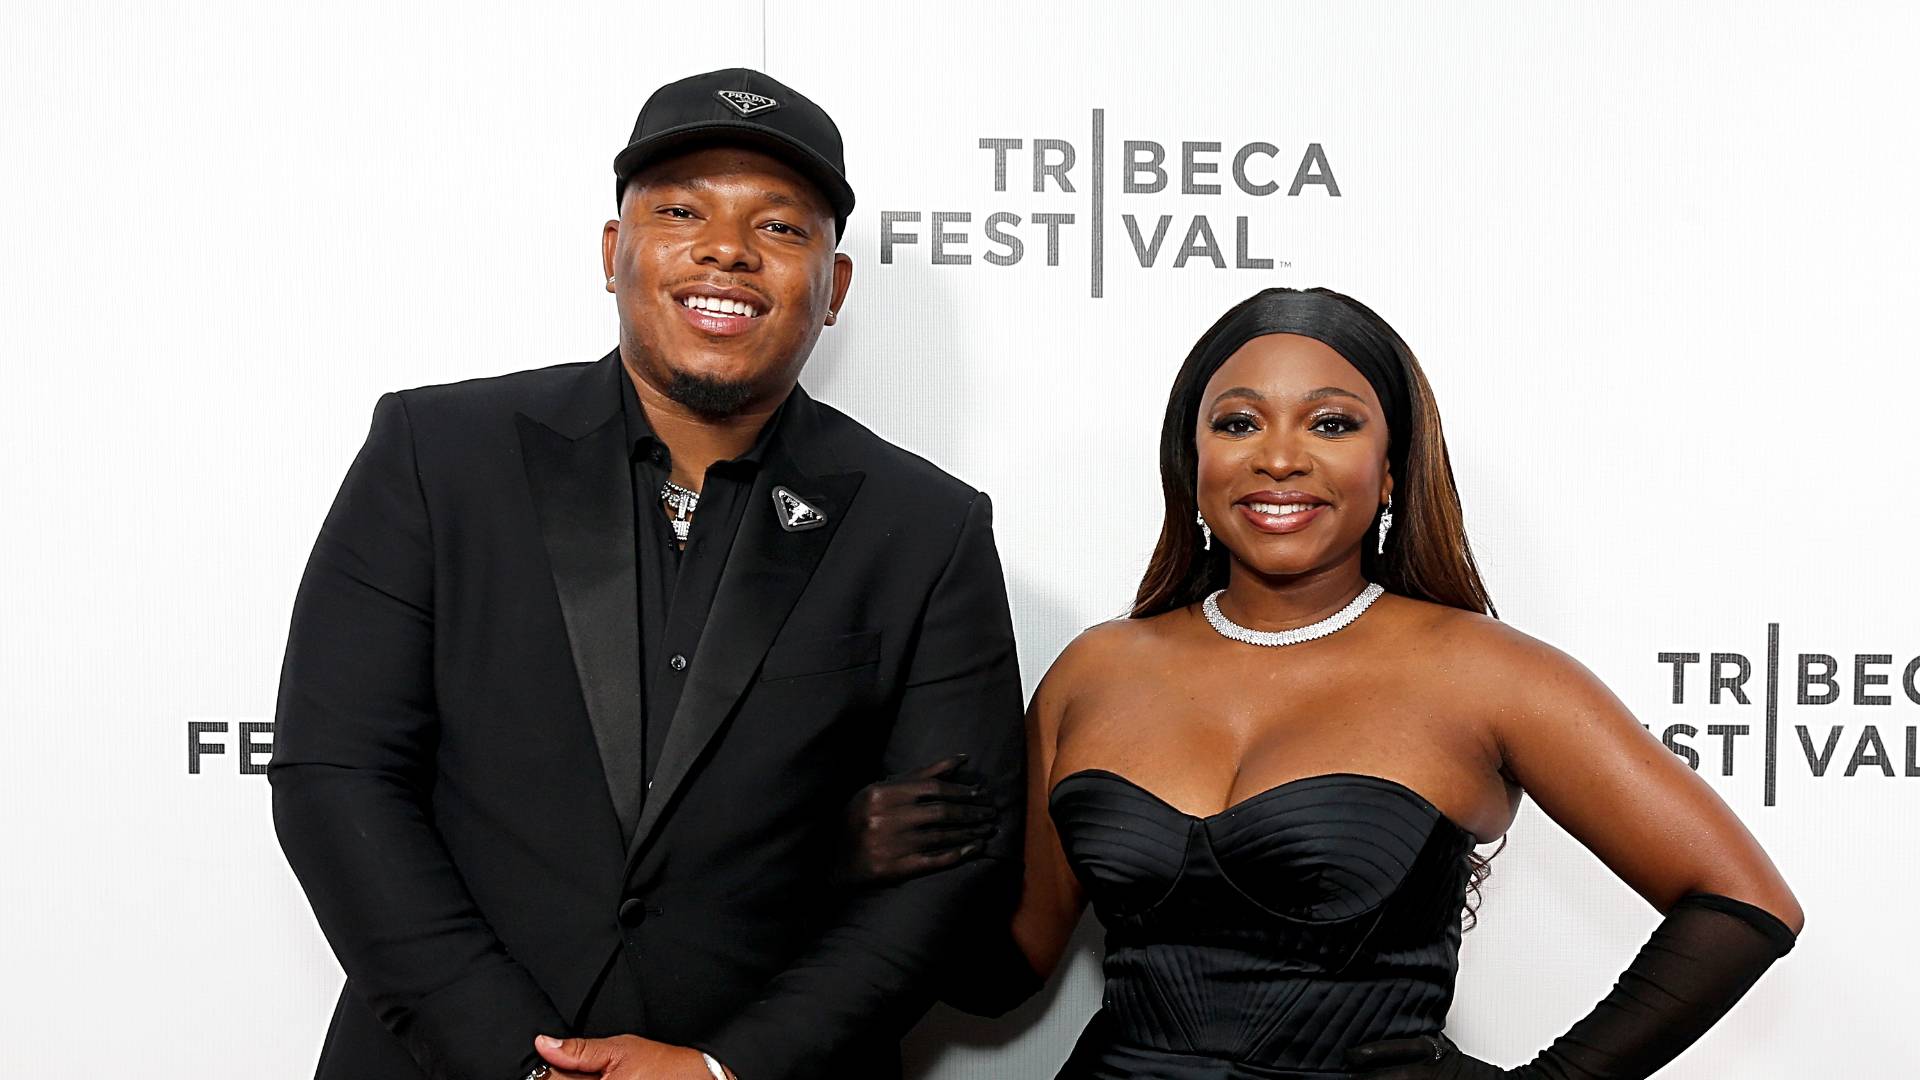  Two Lewis and Naturi Naughton attend "88" premiere during the 2022 Tribeca Festival at Village East Cinema on June 11, 2022 in New York City. 